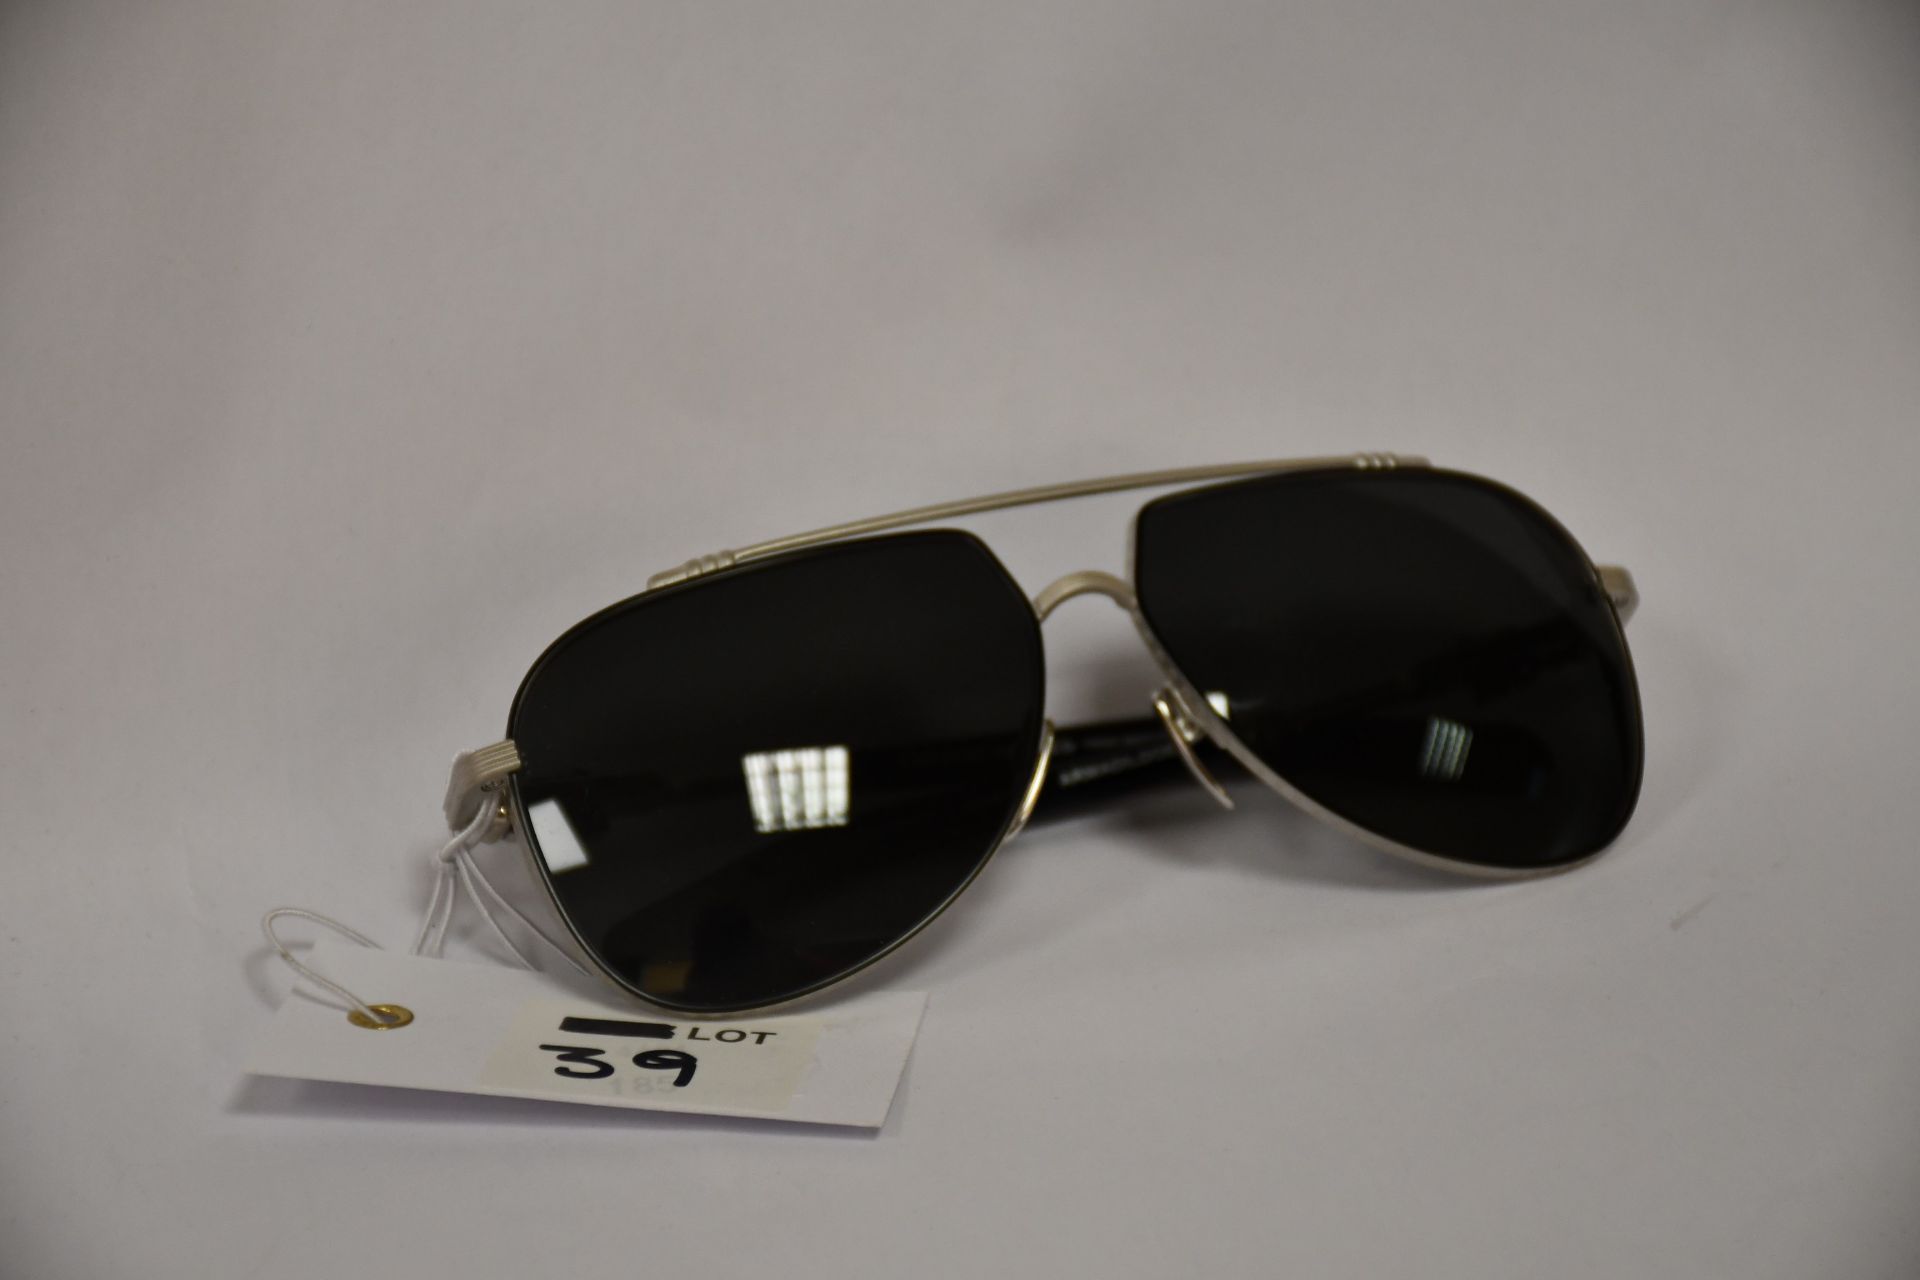 A pair of as new Chrome Hearts Armadildoe sunglasses (No case).